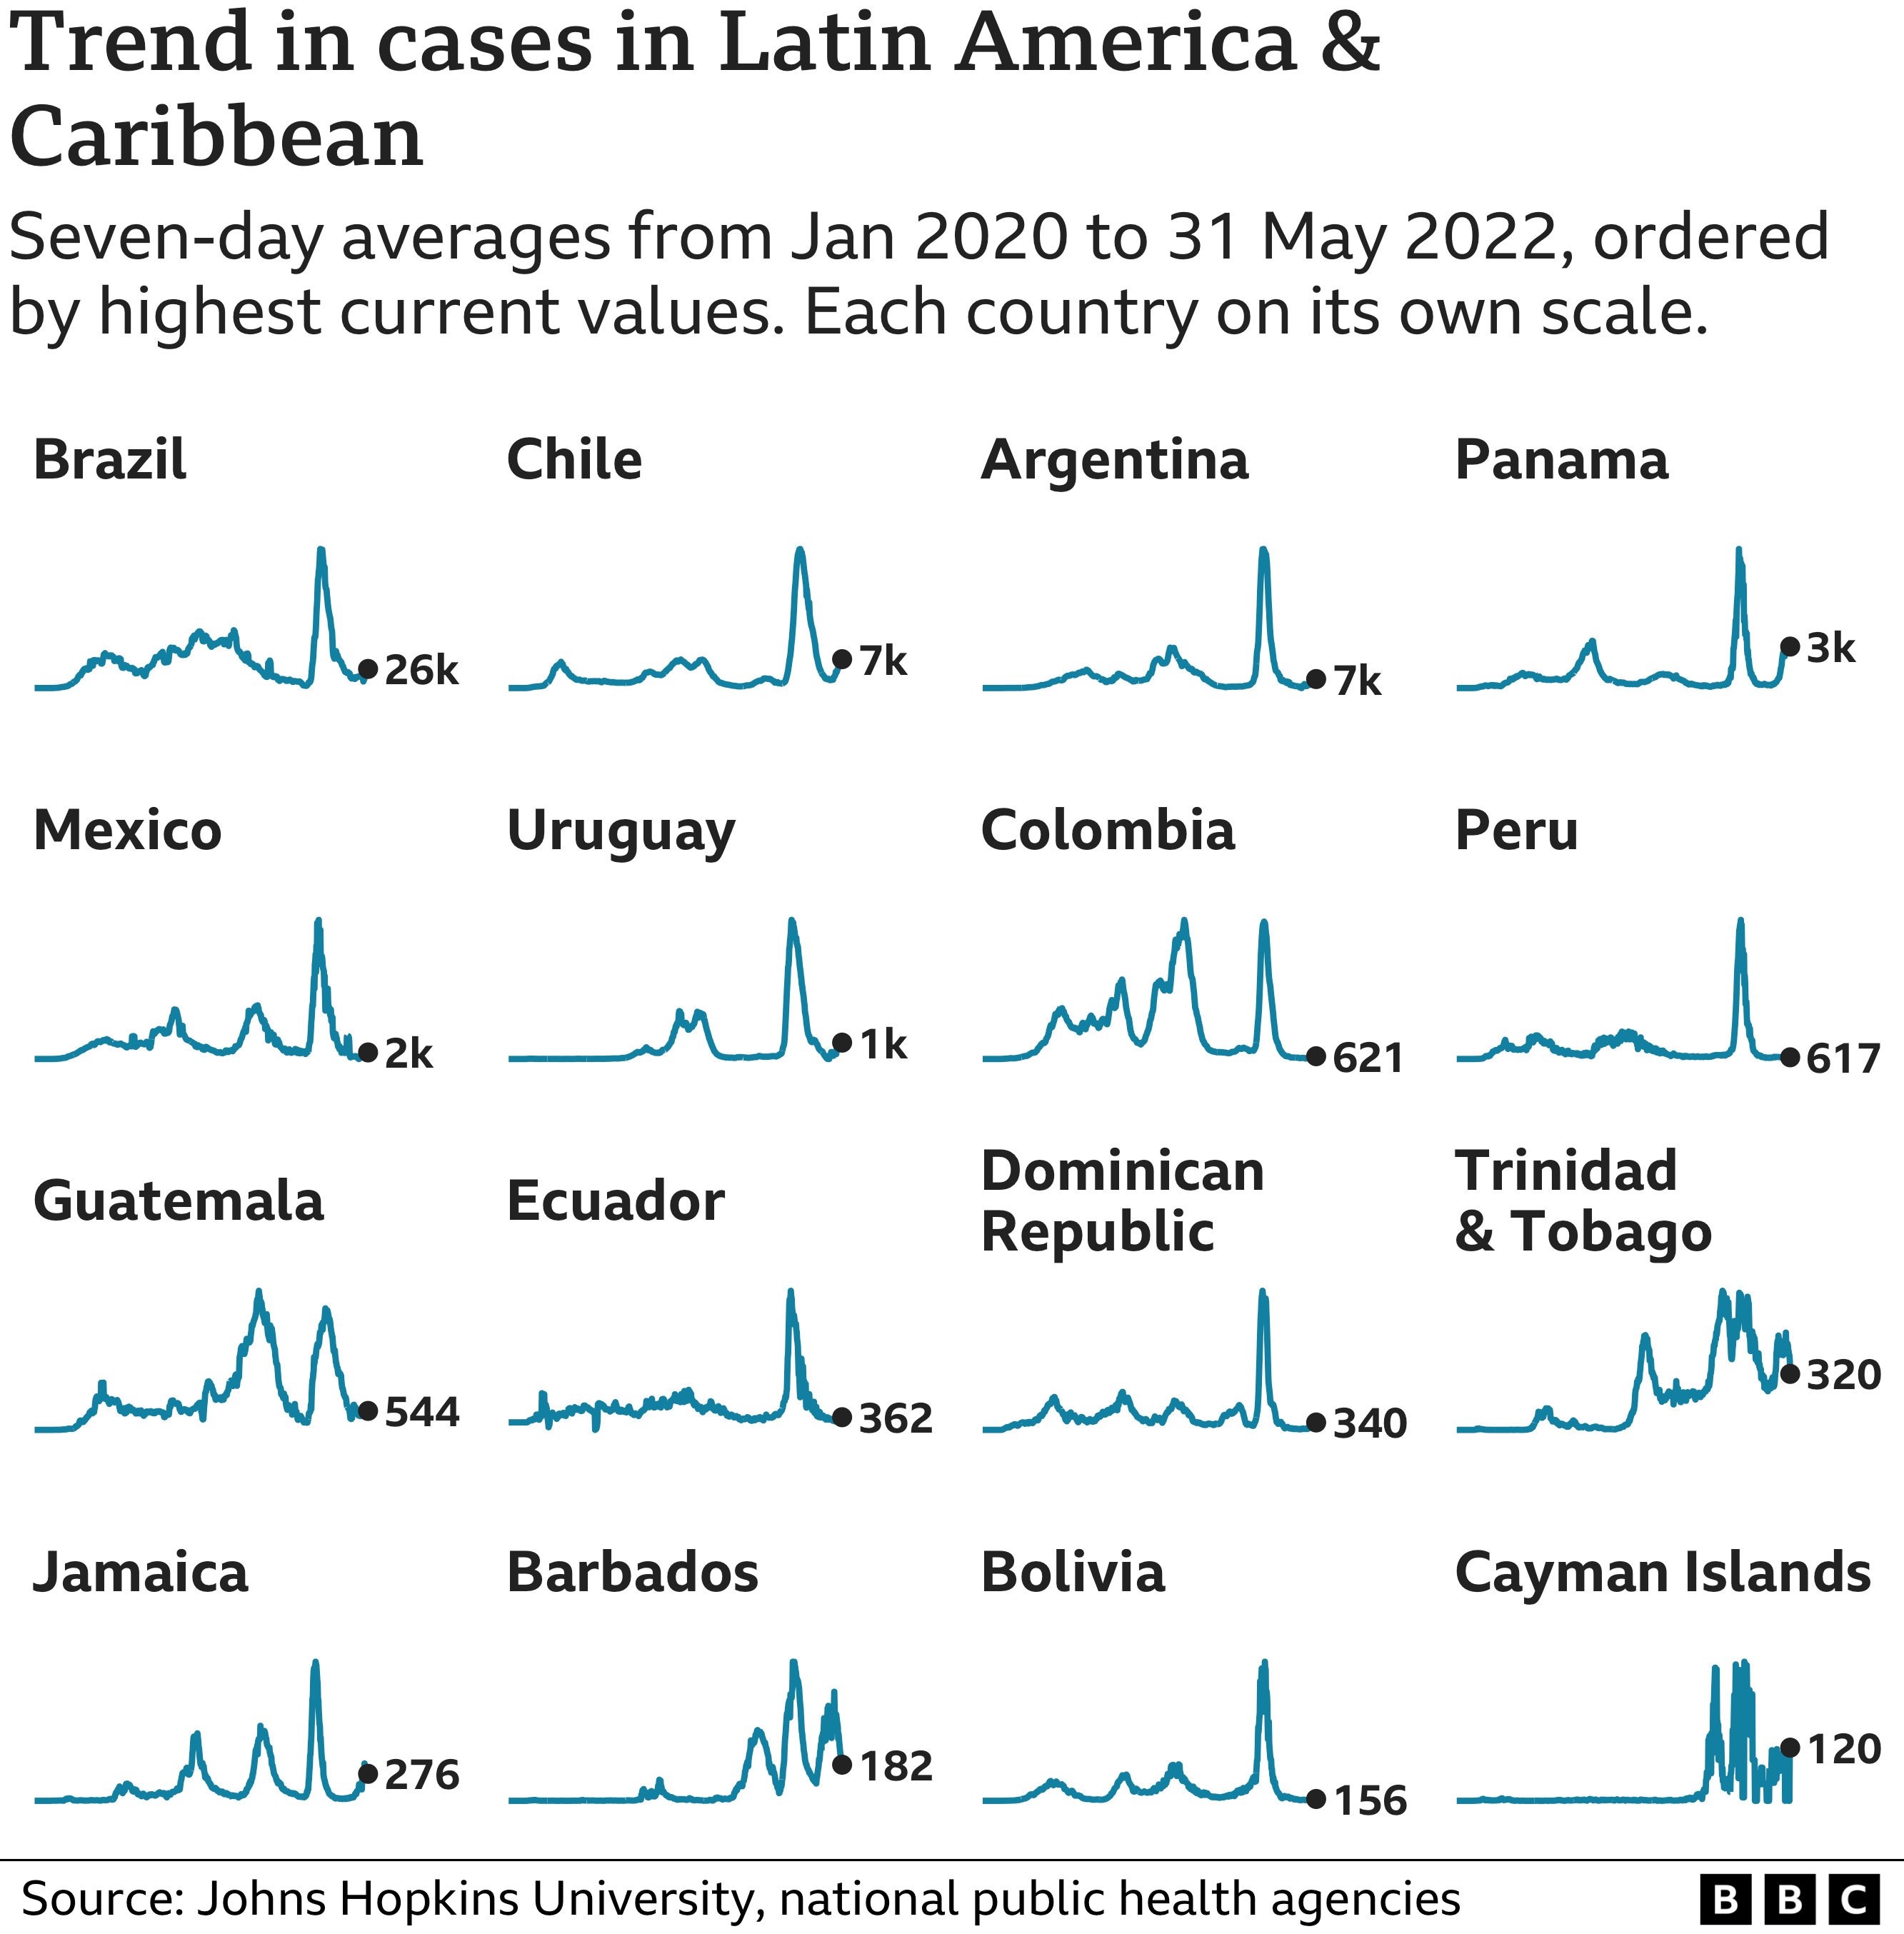 Chart showing coronavirus cases in countries in Latin America and the Caribbean